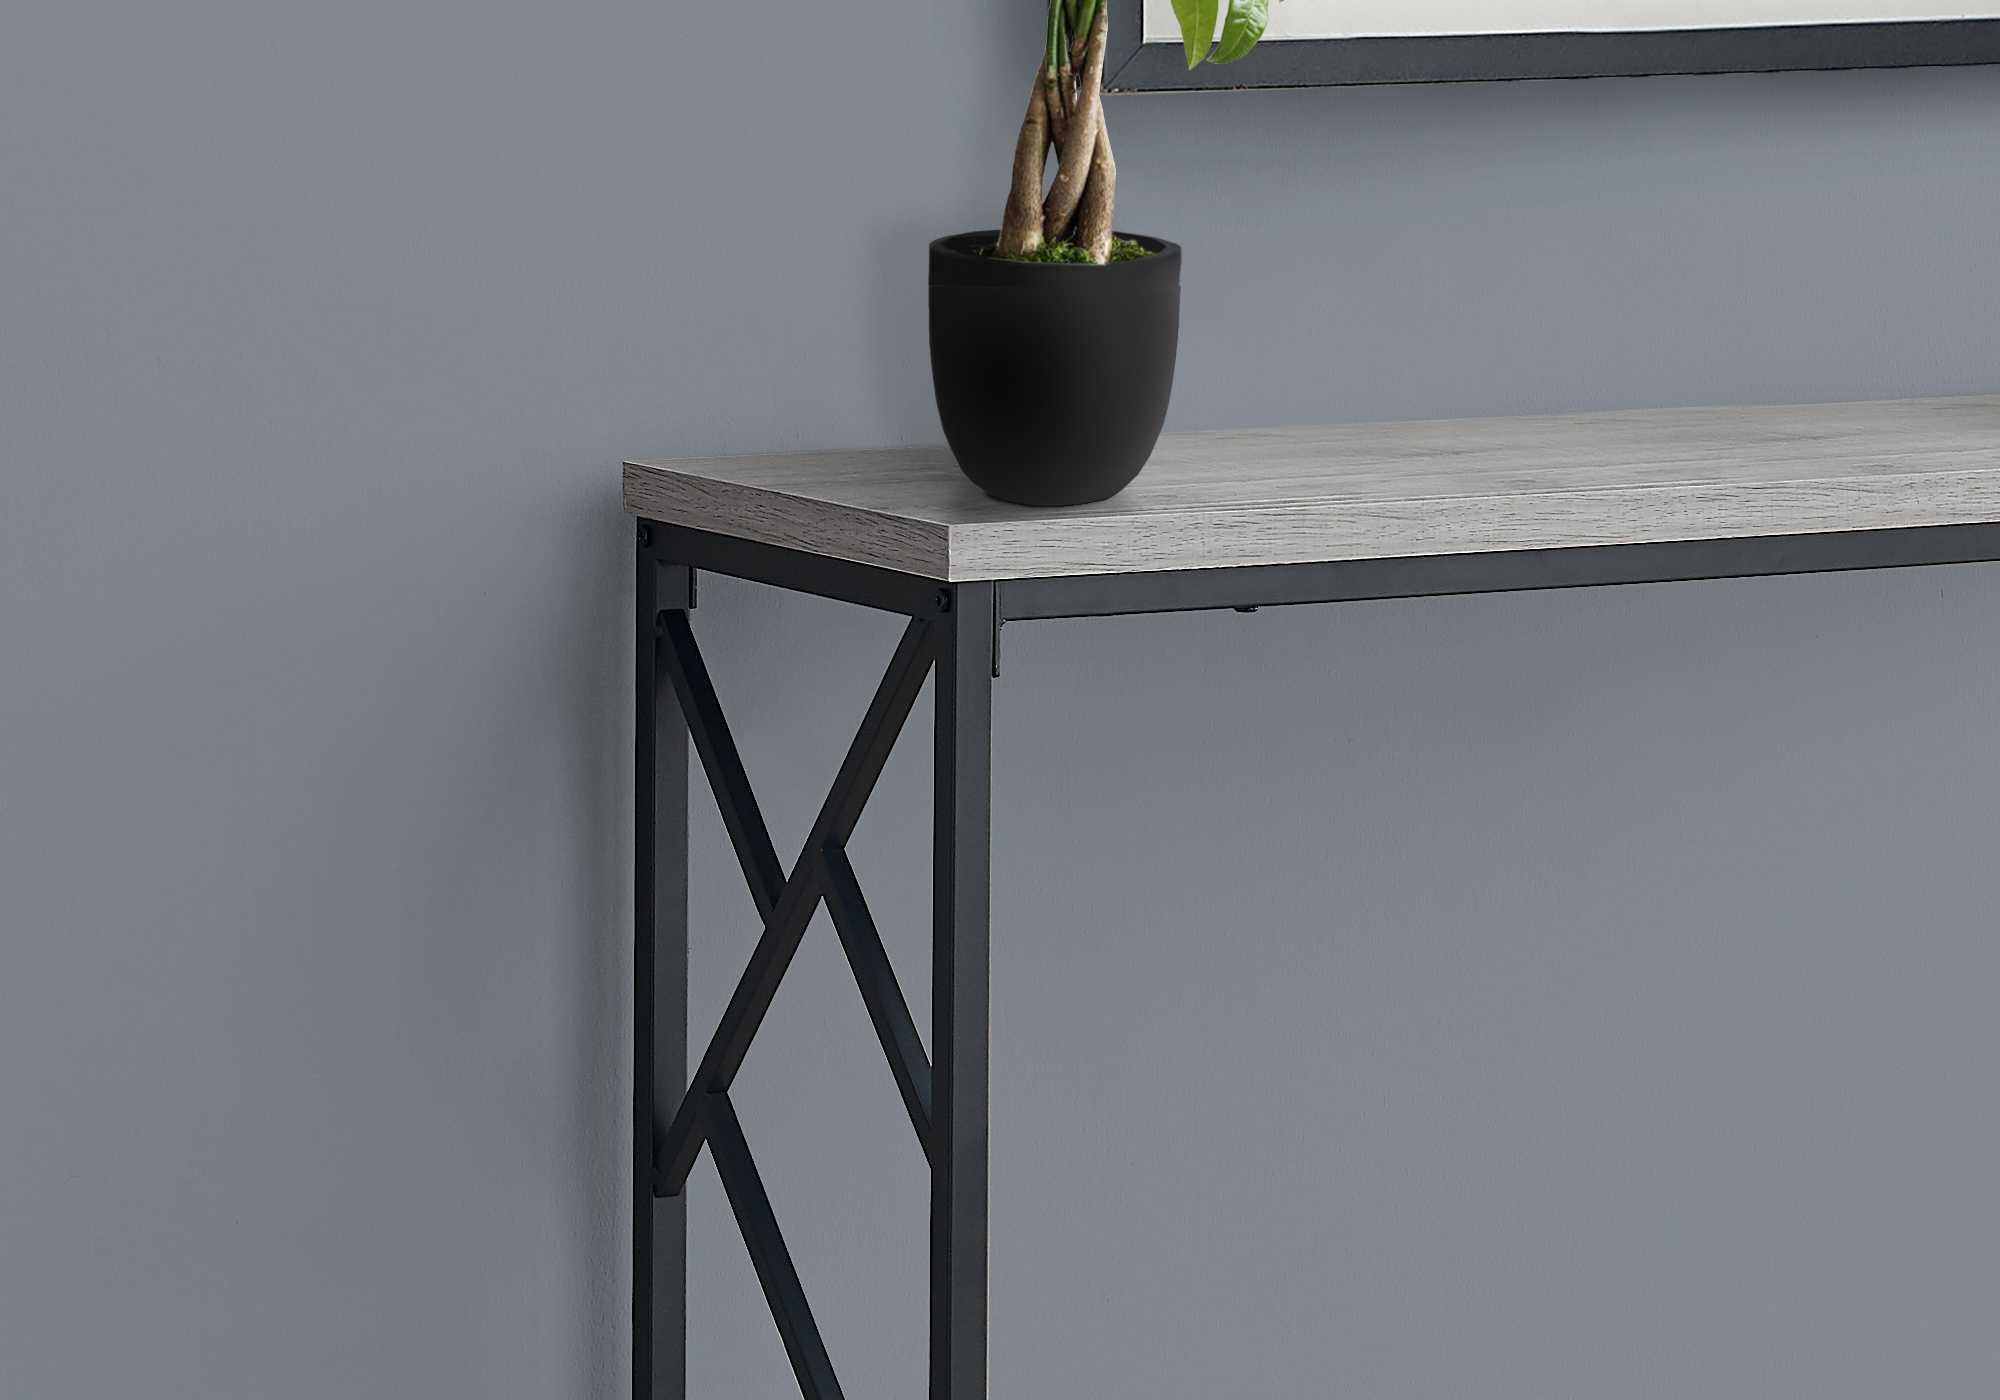 44" Gray And Black Frame Console Table